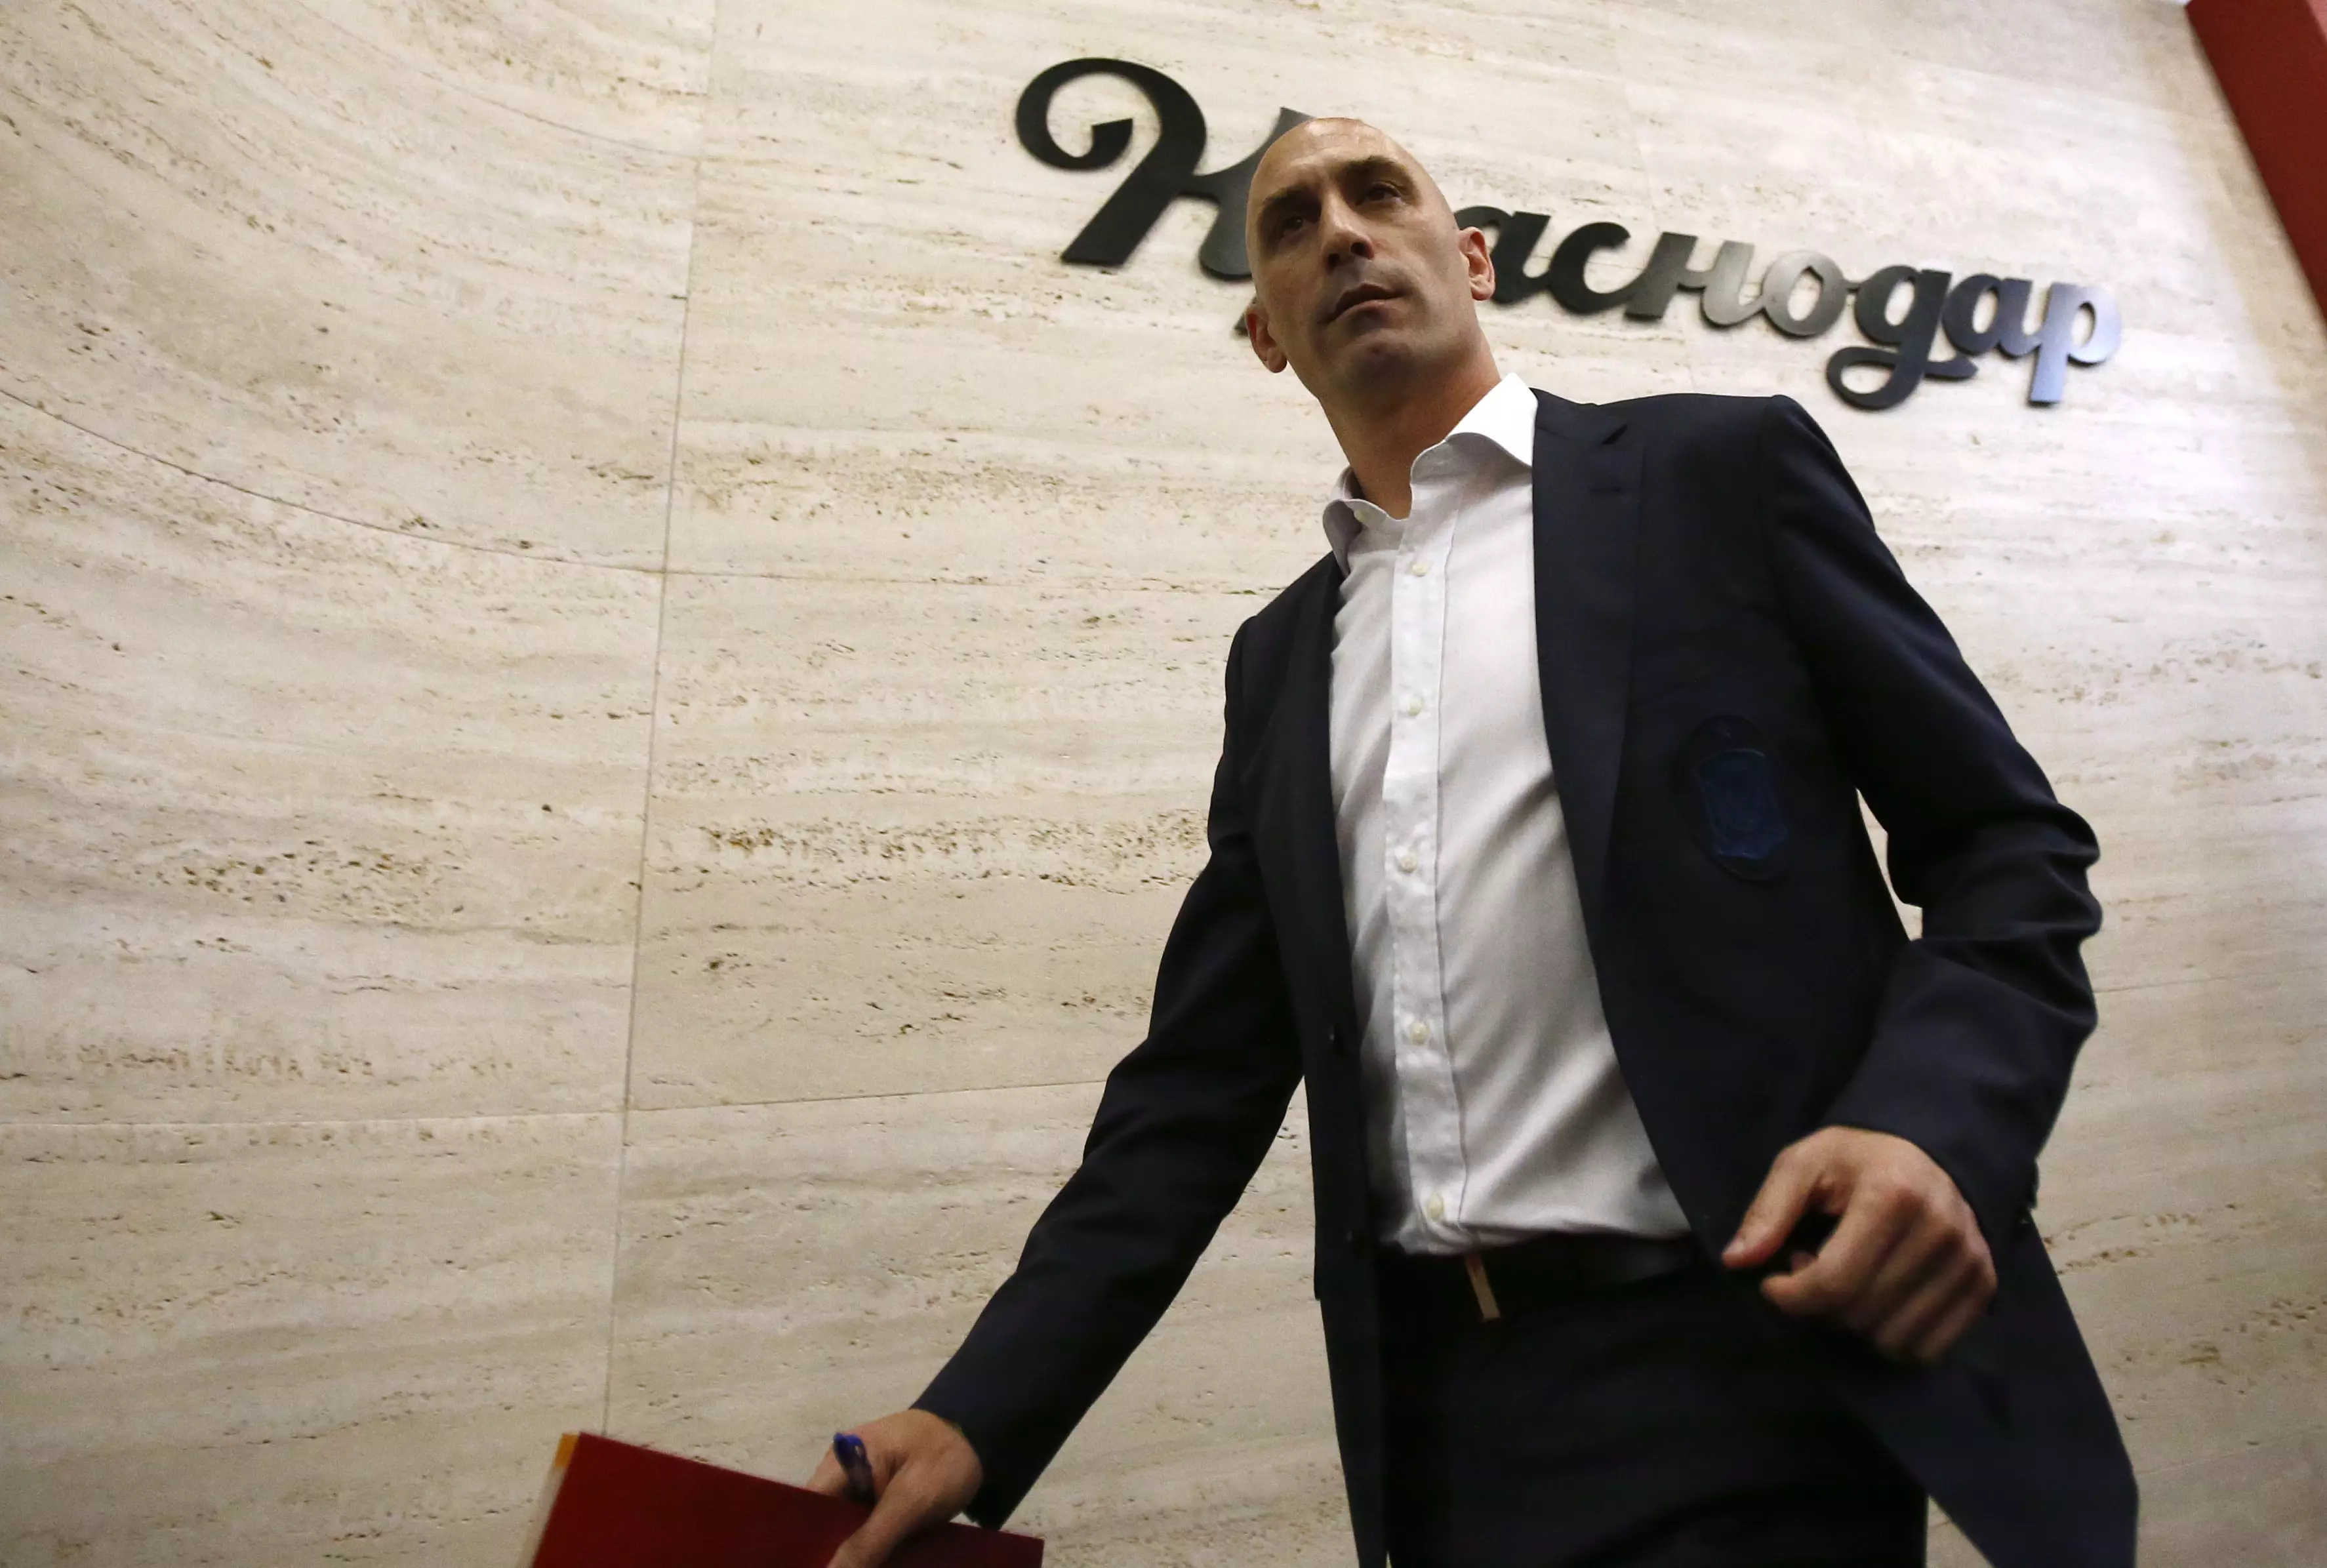 Rubiales leaves a press conference. Image: PA